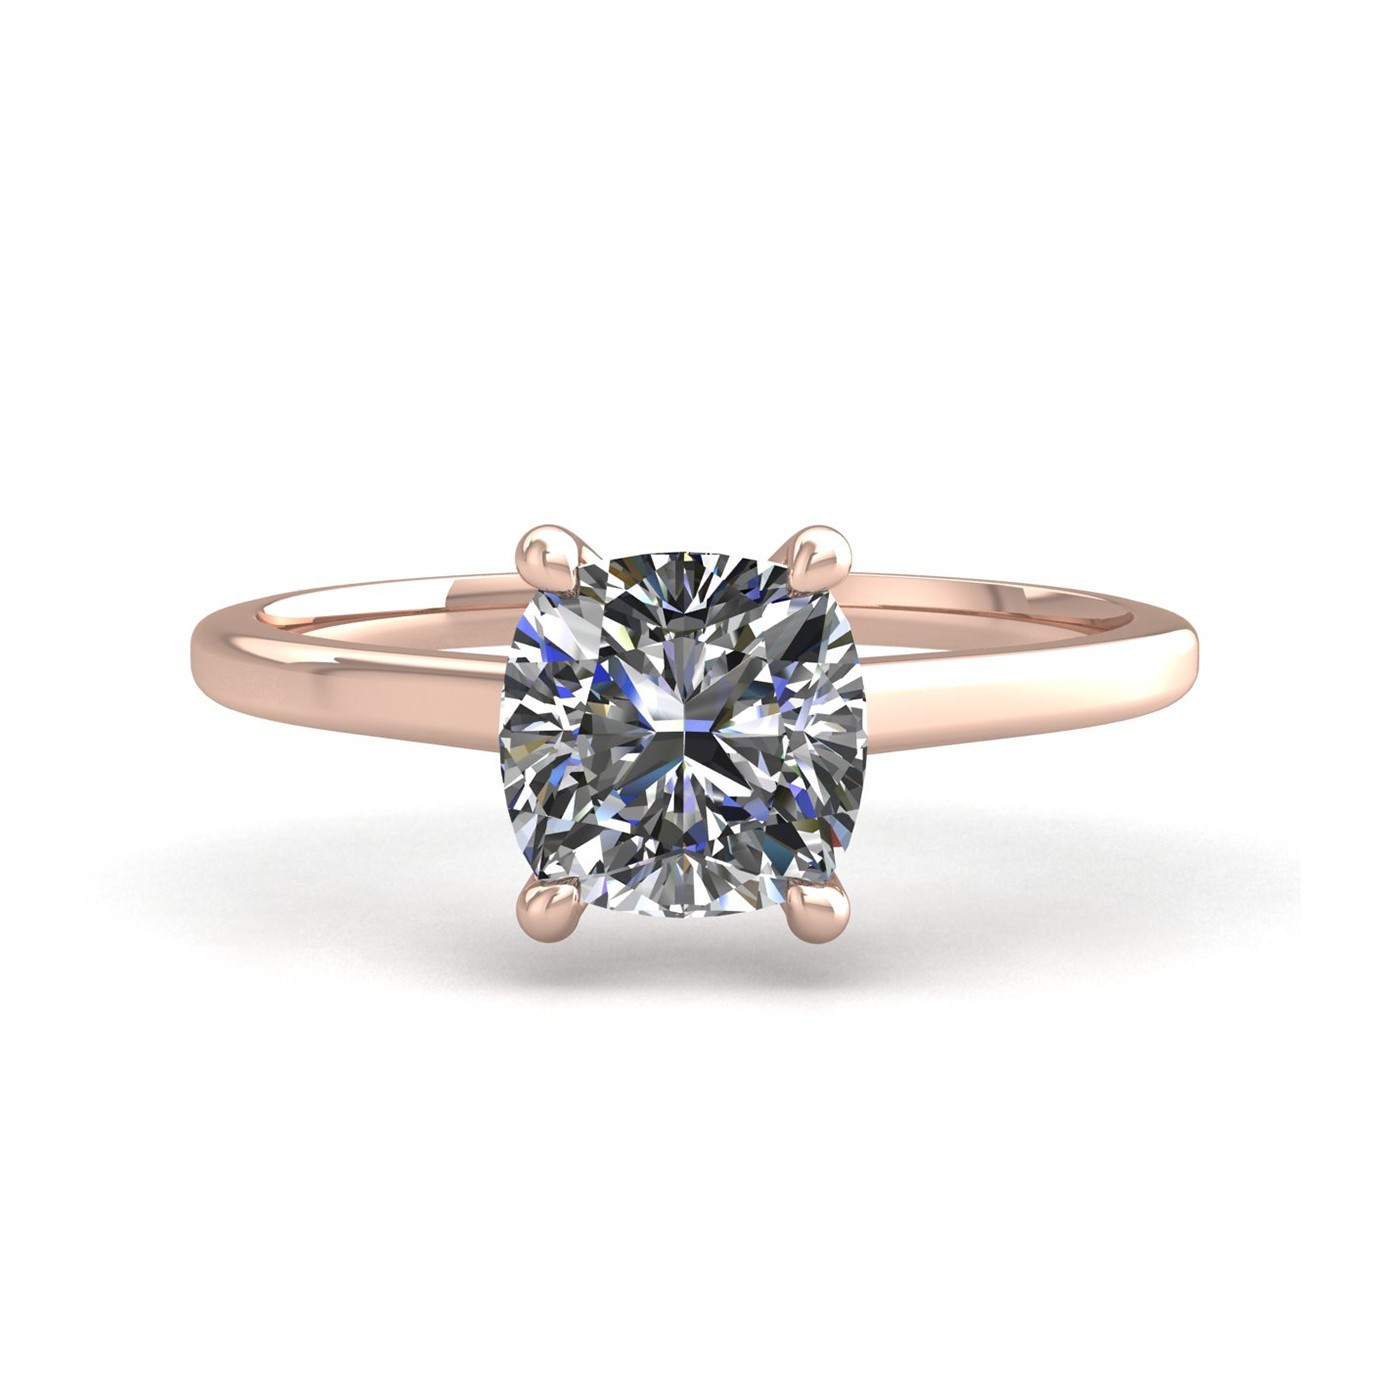 18k rose gold  0,30 ct 4 prongs solitaire cushion cut diamond engagement ring with whisper thin band Photos & images